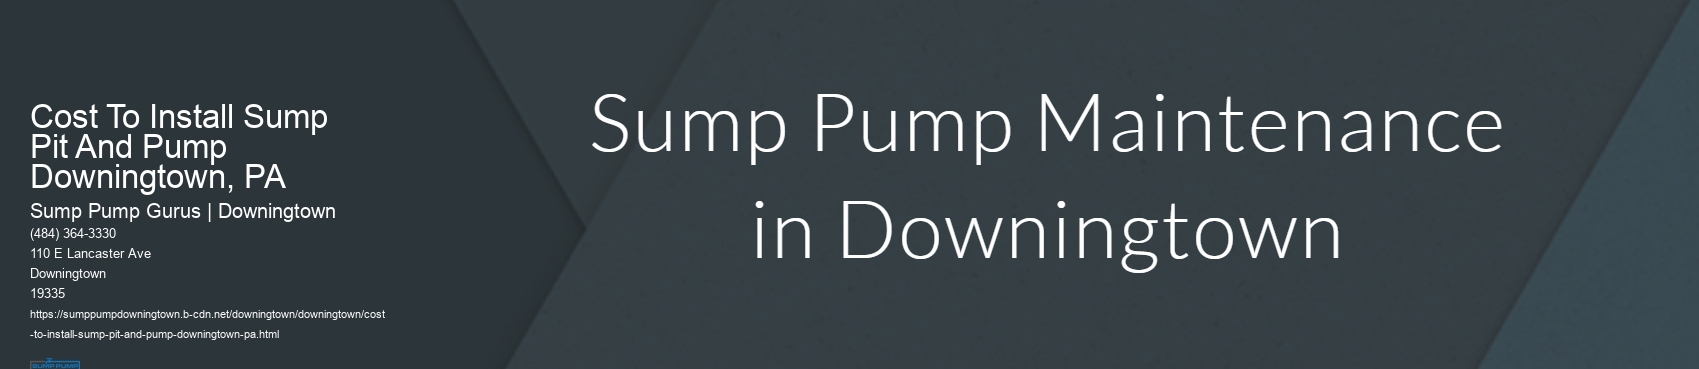 Cost To Install Sump Pit And Pump Downingtown, PA